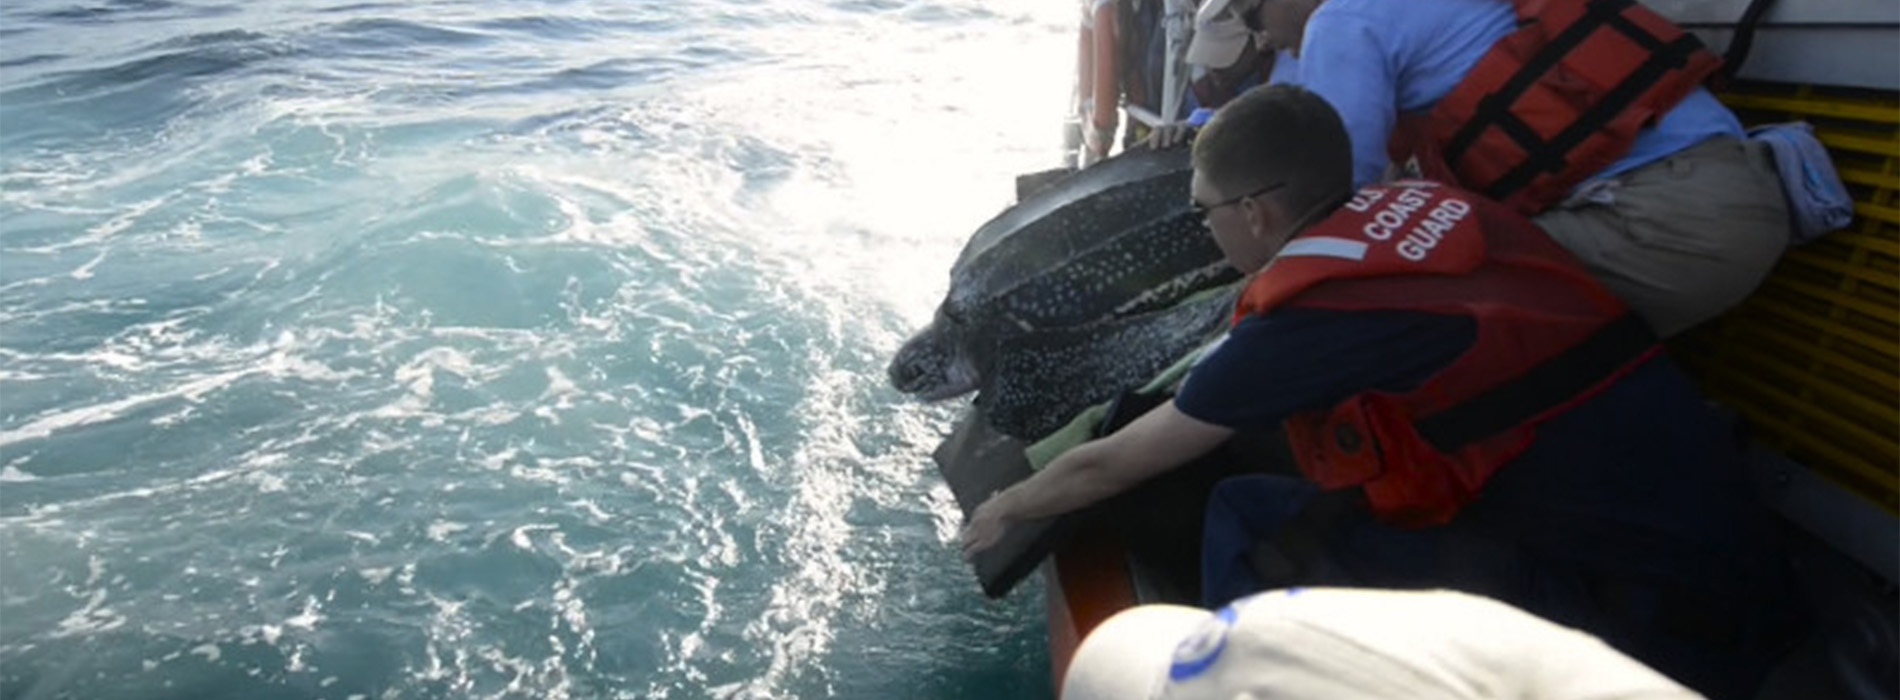 Sea Turtle leaning over boat being held by rescue team